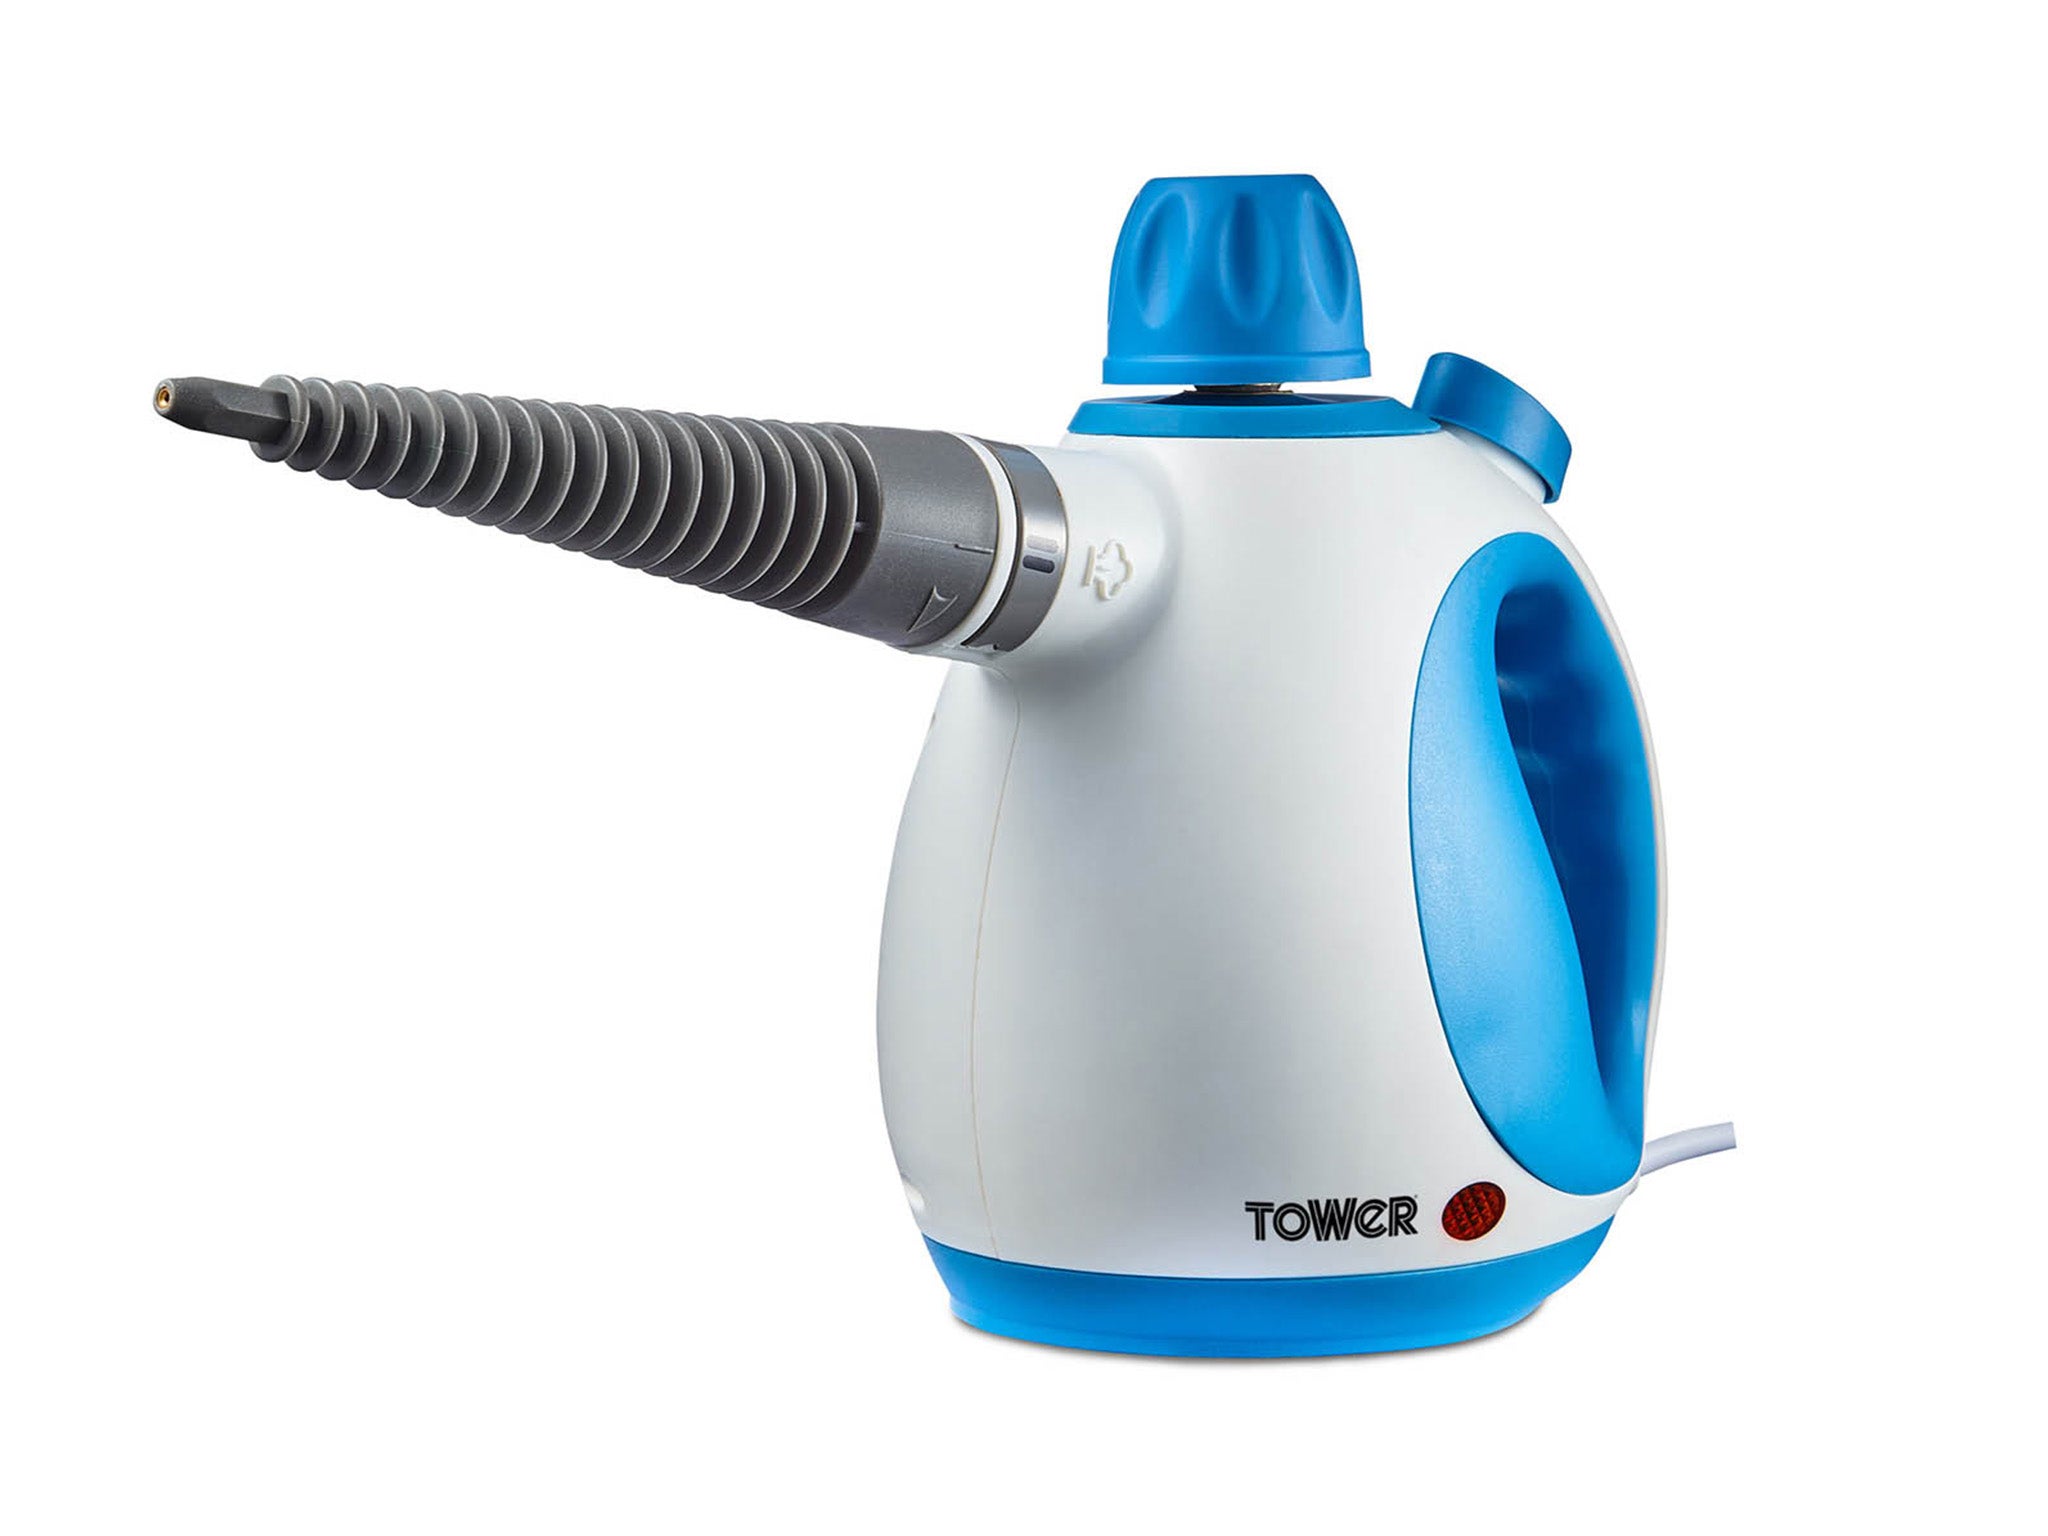 https://static.independent.co.uk/2023/02/16/11/Tower%20THS10%20handheld%20steam%20cleaner.jpg